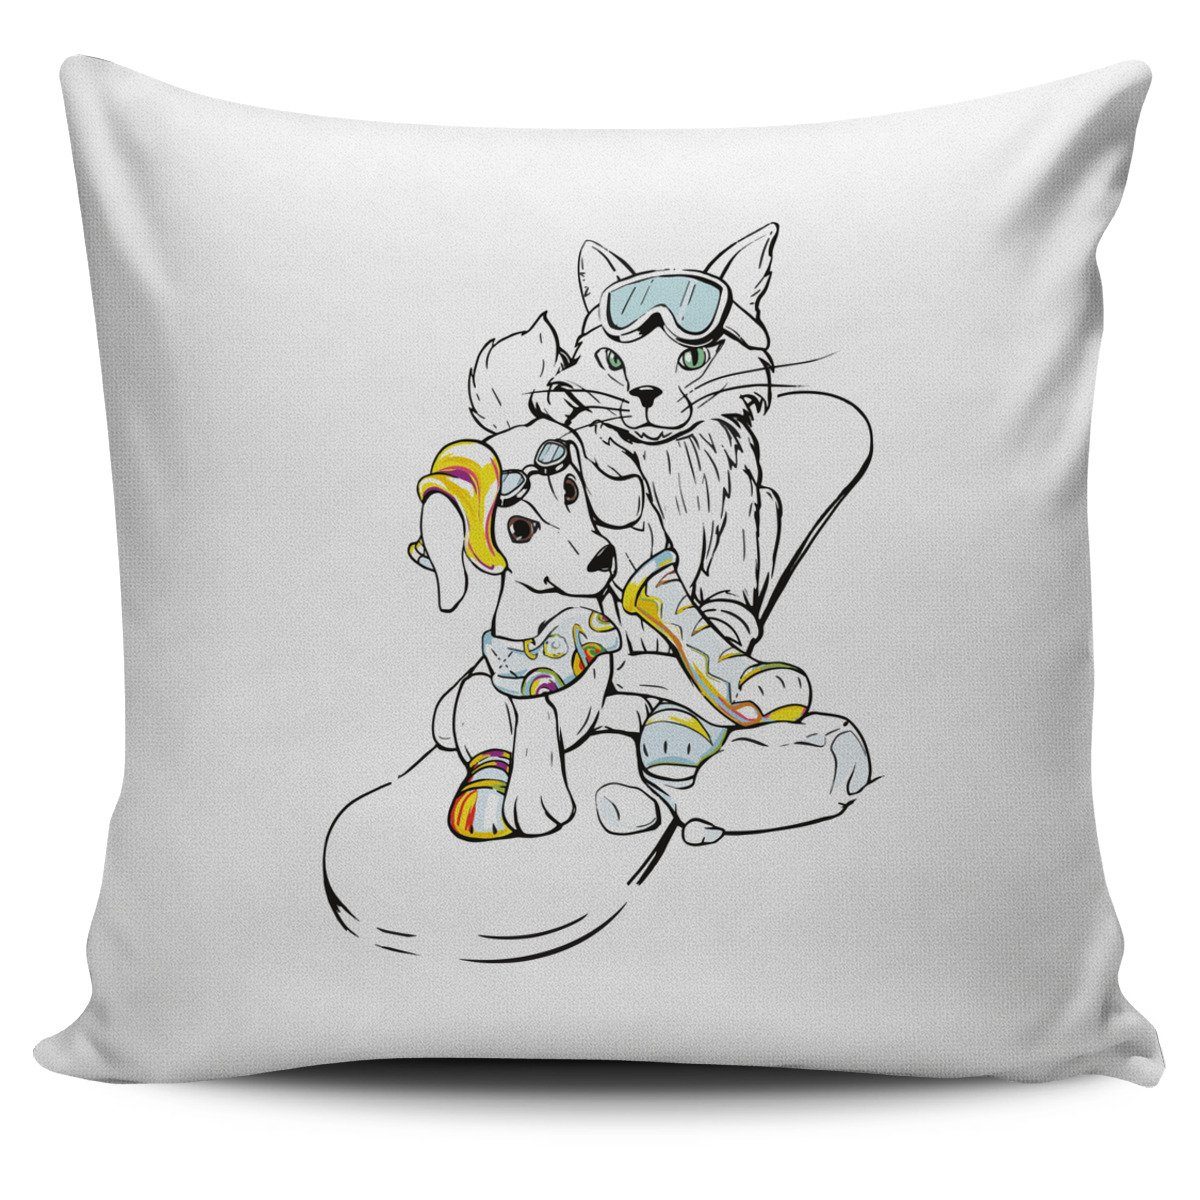 Pillow Cover - Snowboarding Cat and Dog